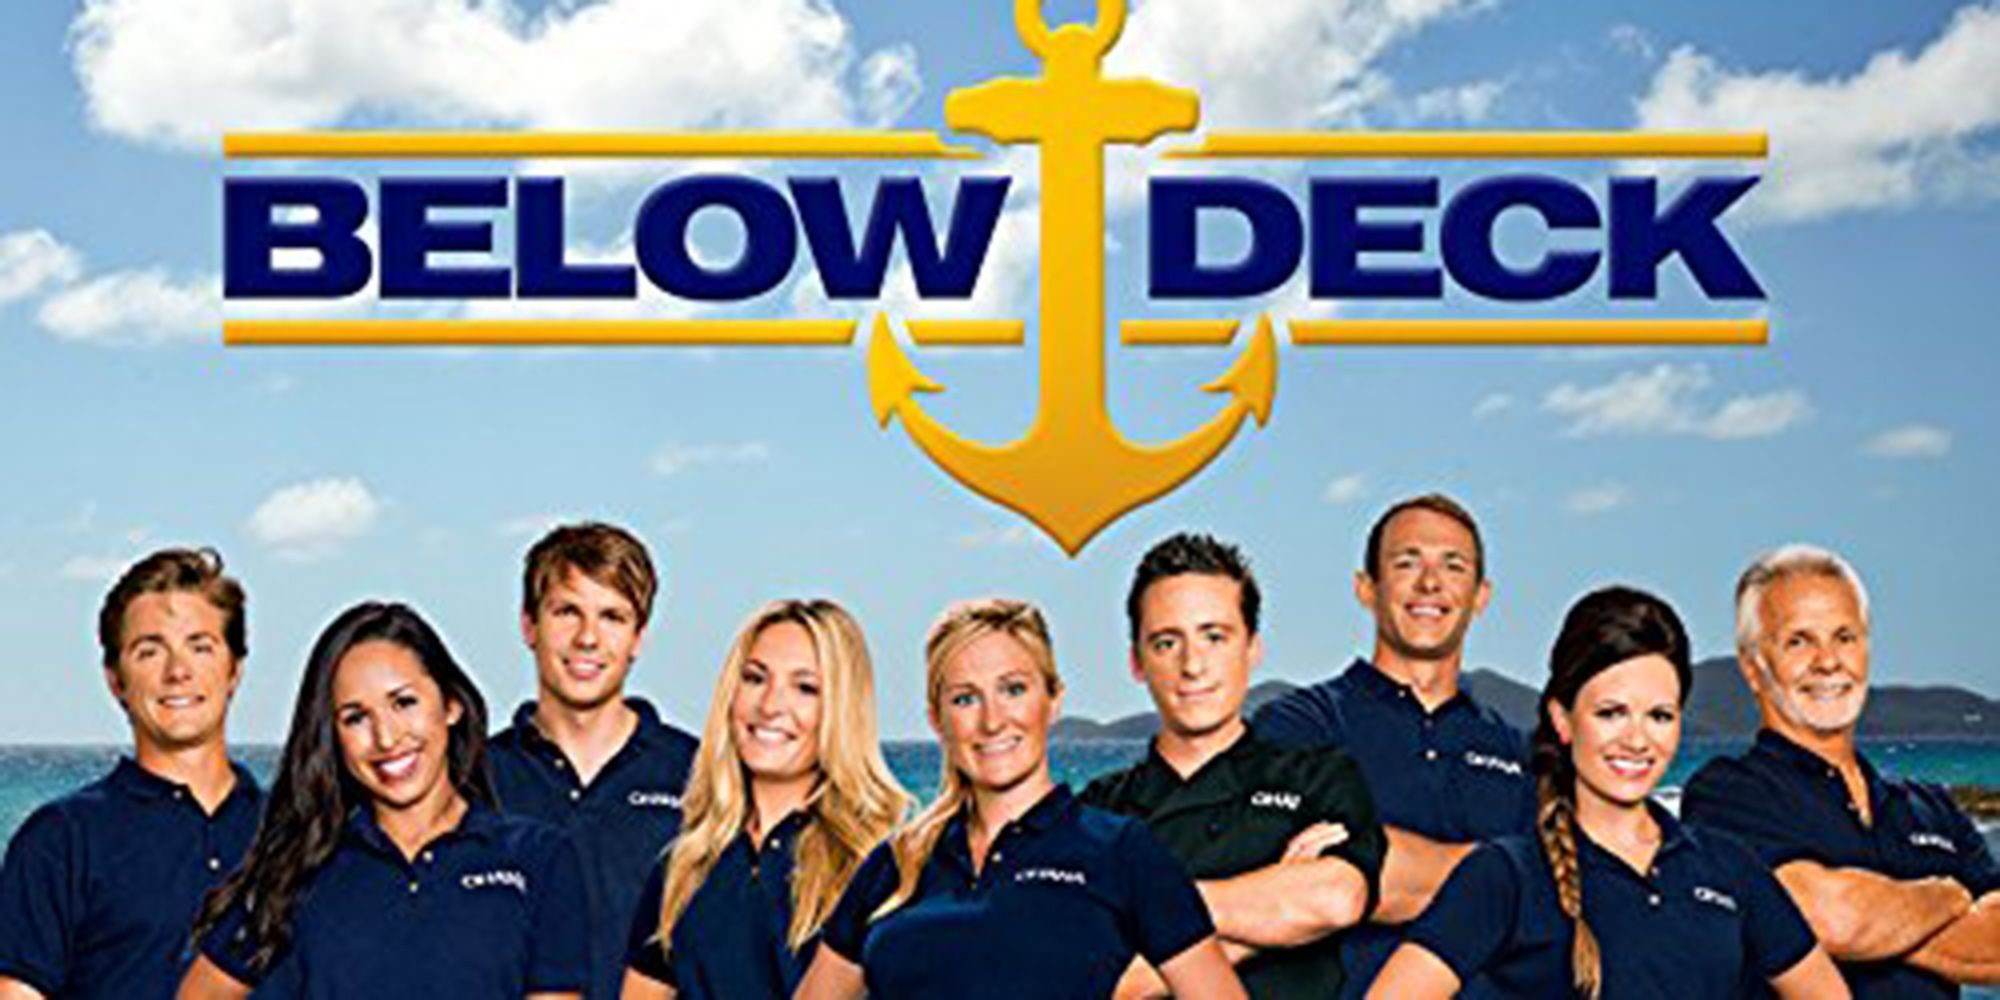 Below Deck New Spinoff Location Revealed for Peacock Streaming Series